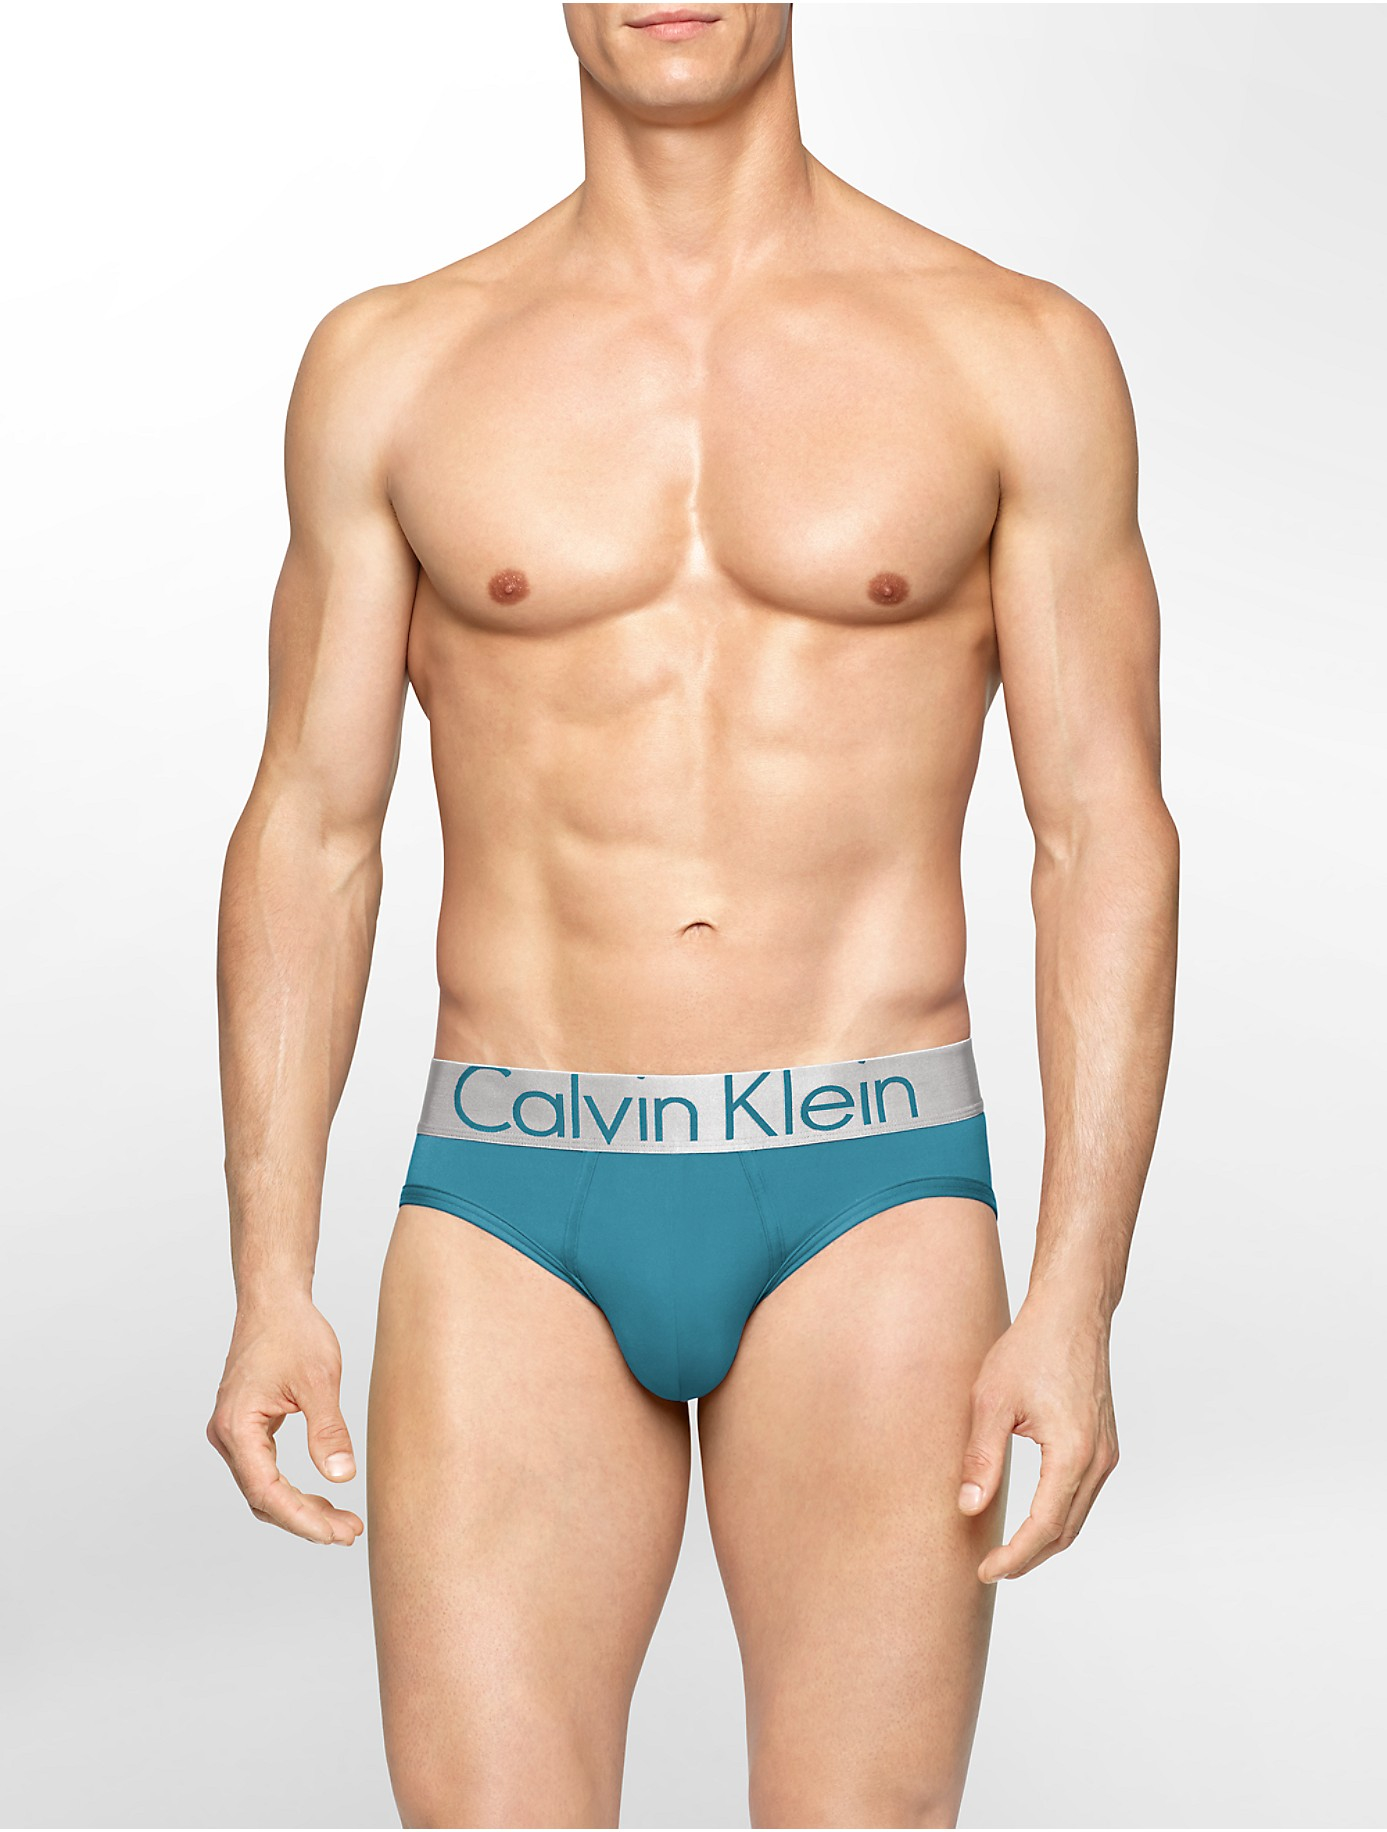 ck steel briefs, OFF 78%,Free Shipping,